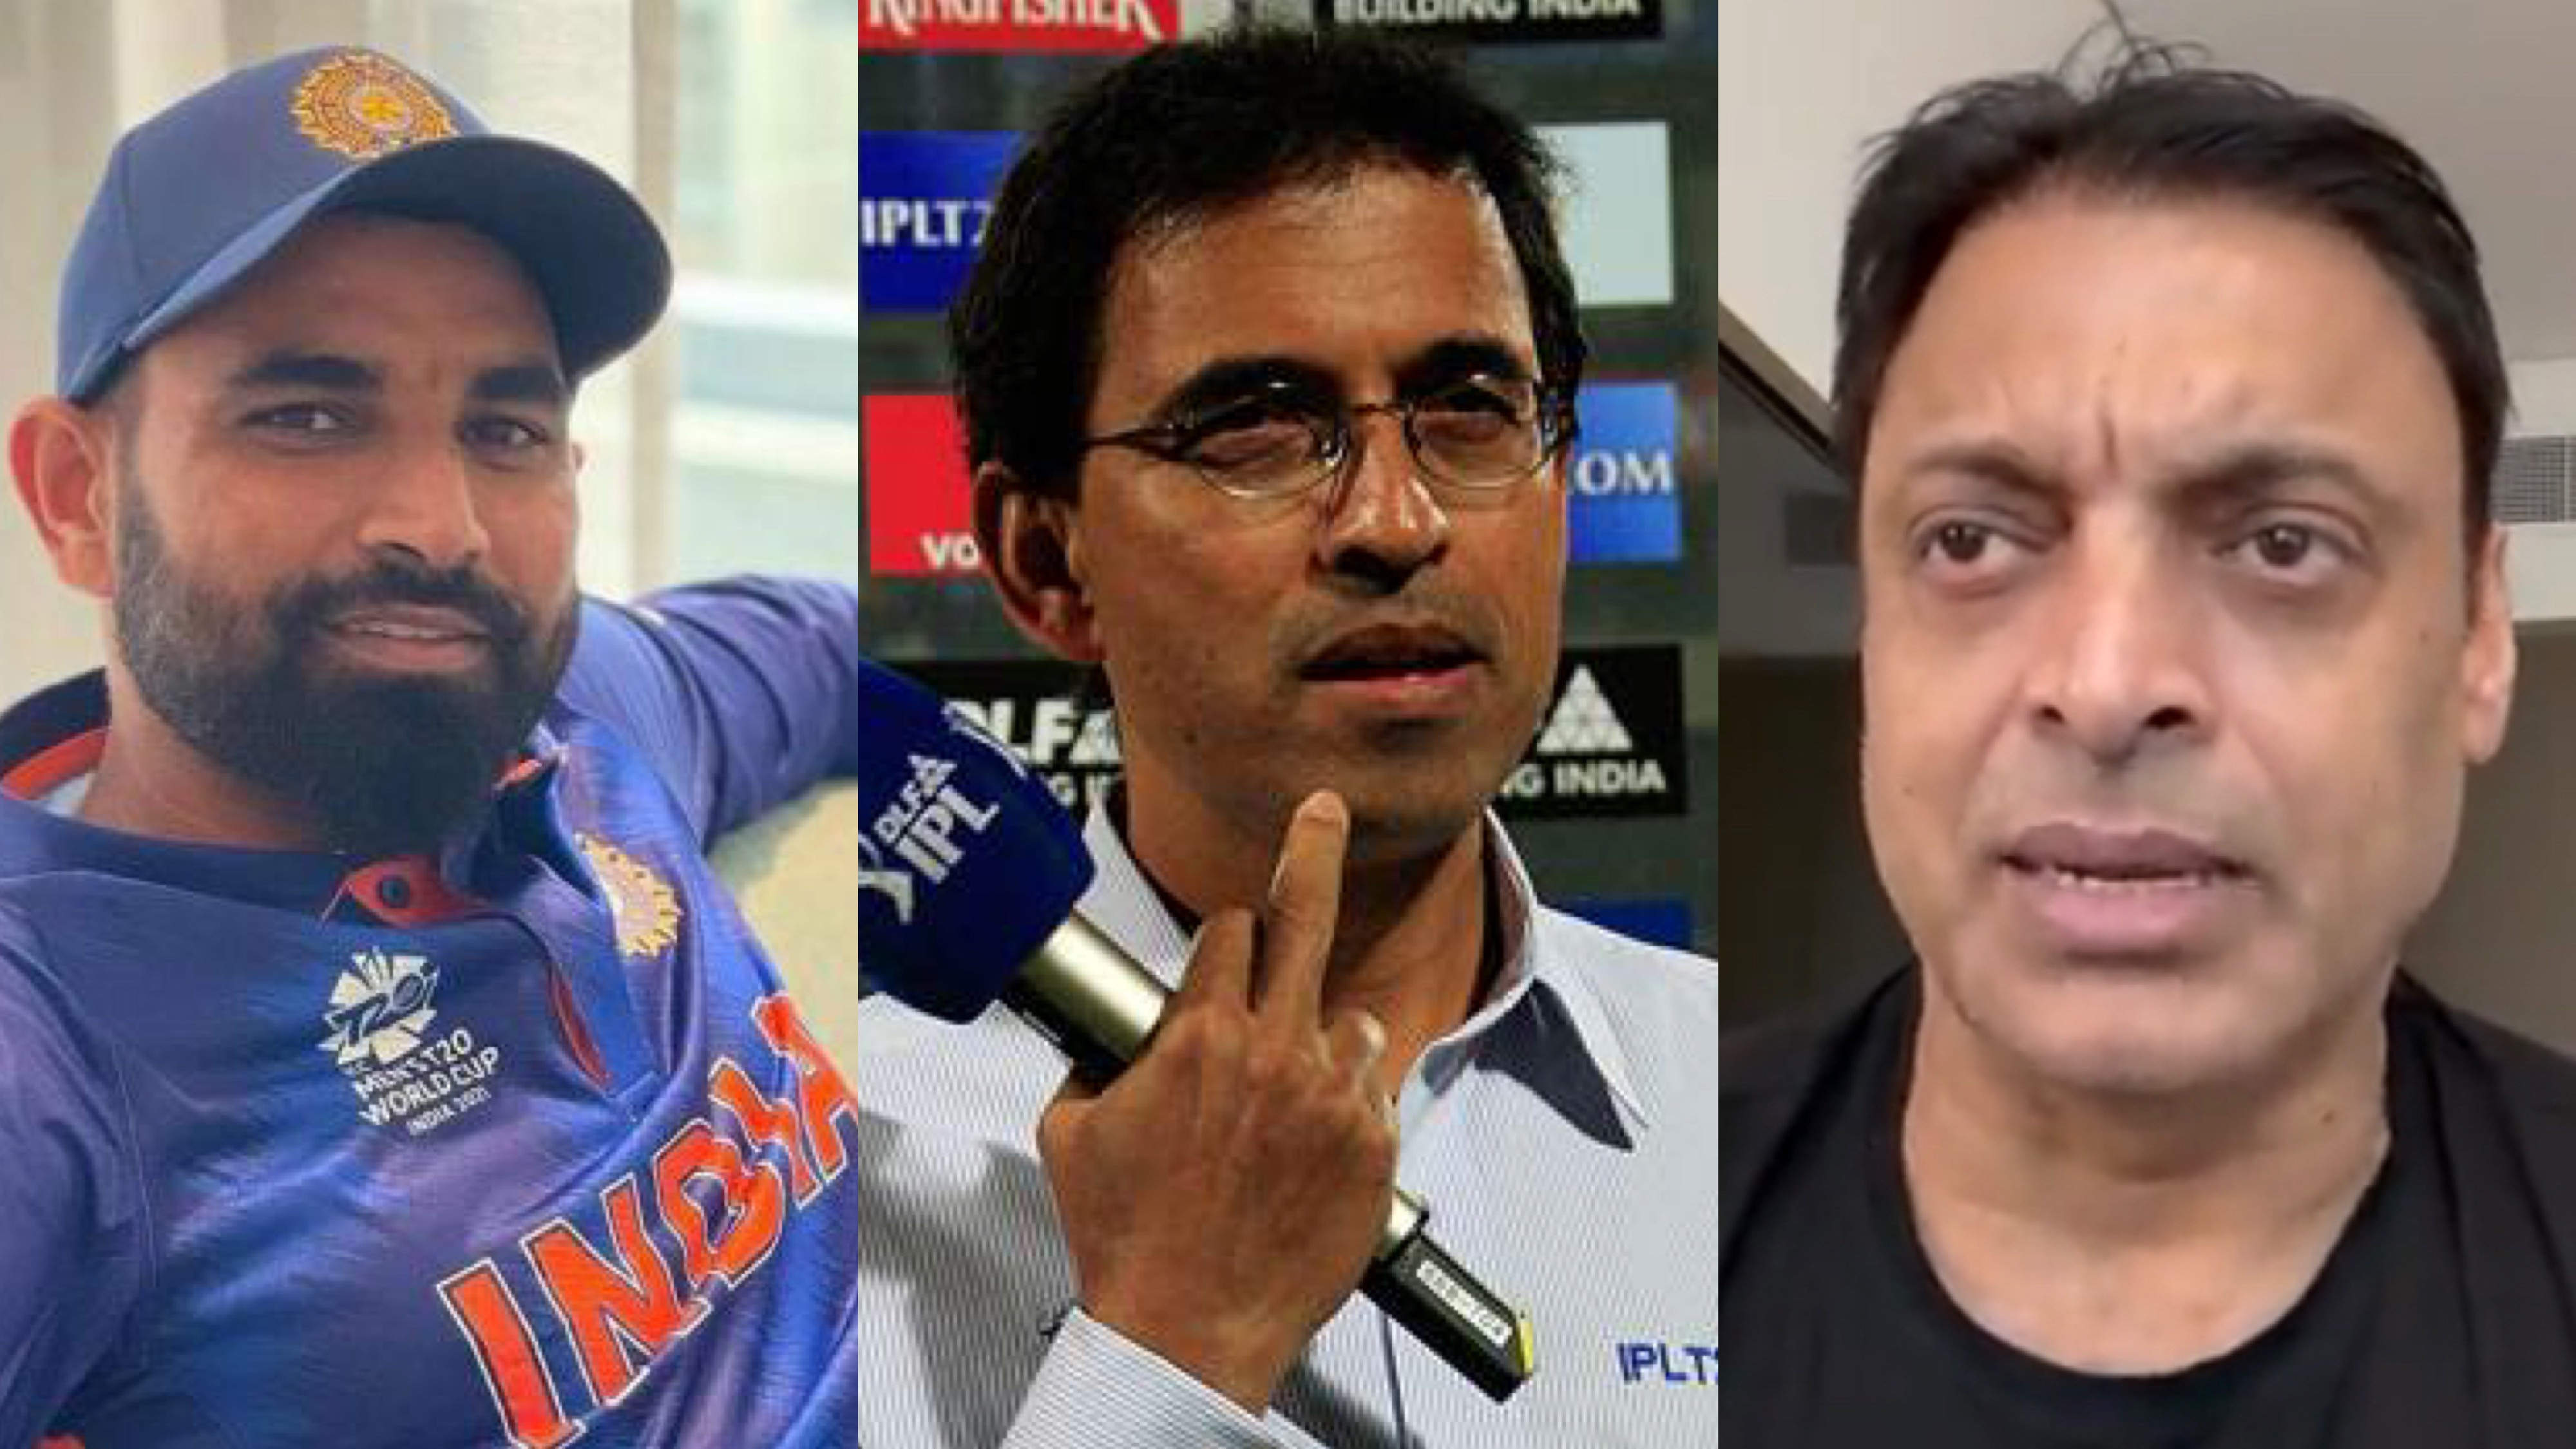 T20 World Cup 2022: “This is what you call sensible tweet” - Shoaib Akhtar responds to Mohammad Shami’s ‘karma’ tweet